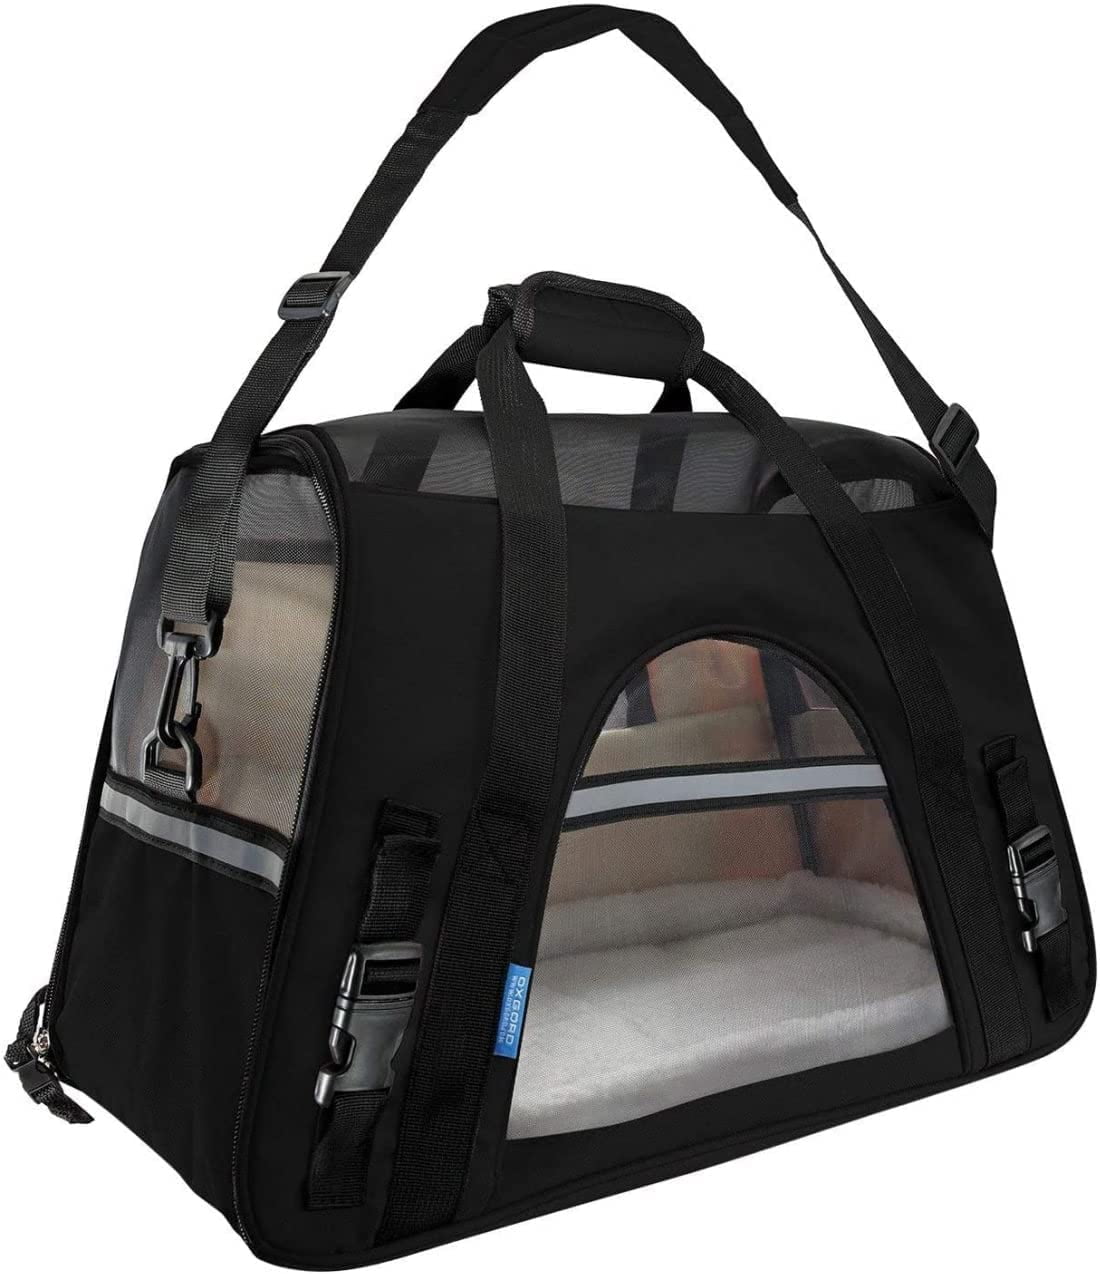 HITSLAM Pet Carrier Dog Carrier Soft Sided Pet Travel Carrier for Cats,  Small dogs, Kittens or Puppies, Collapsible, Durable, Airline Approved,  Travel Friendly Black (L) – BigaMart